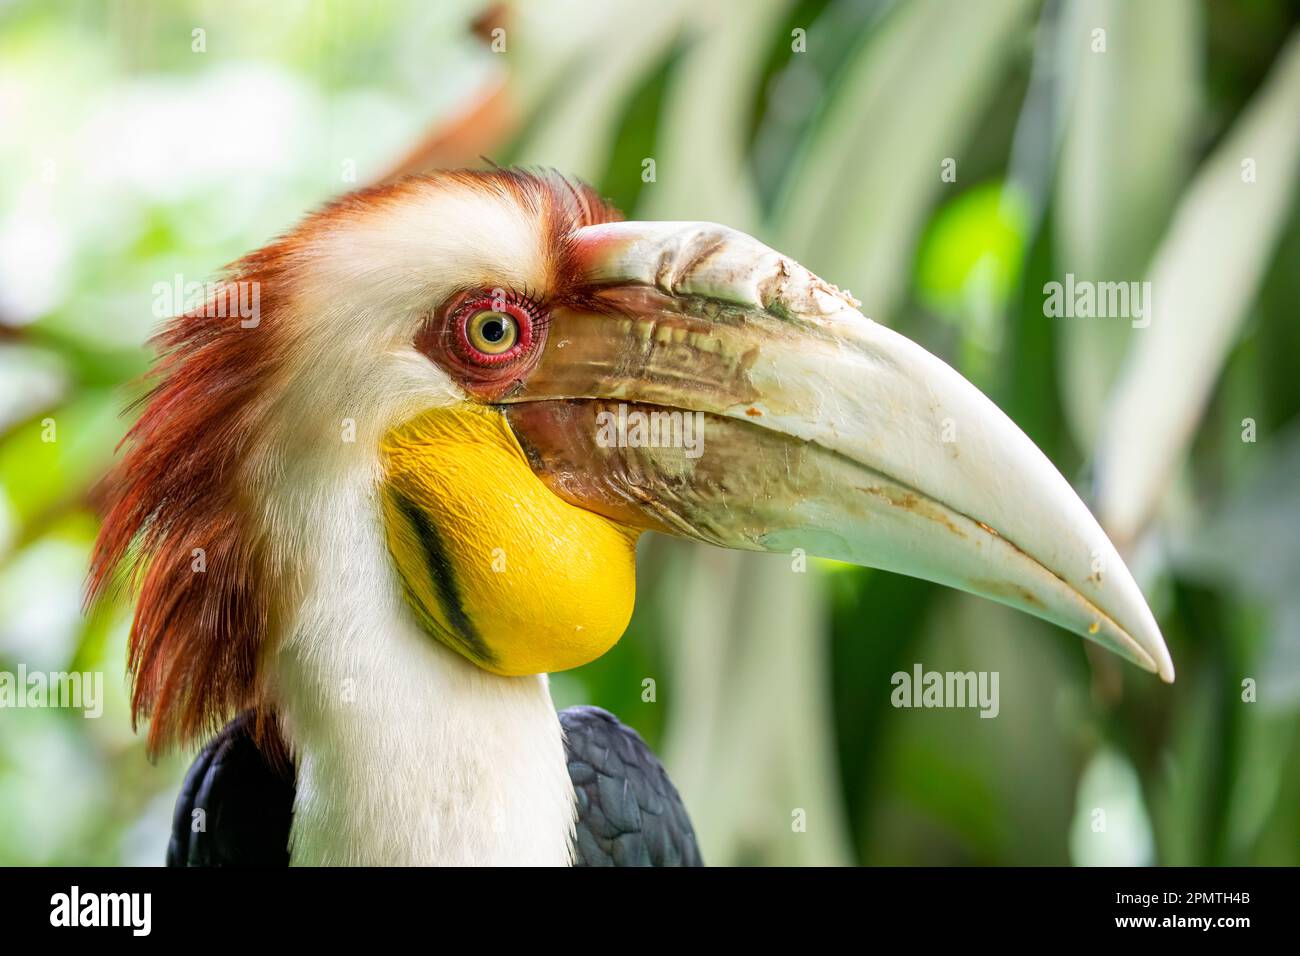 The male wreathed hornbill. It (Rhyticeros undulatus) is an Old World tropical bird of the hornbill family Bucerotidae. Stock Photo